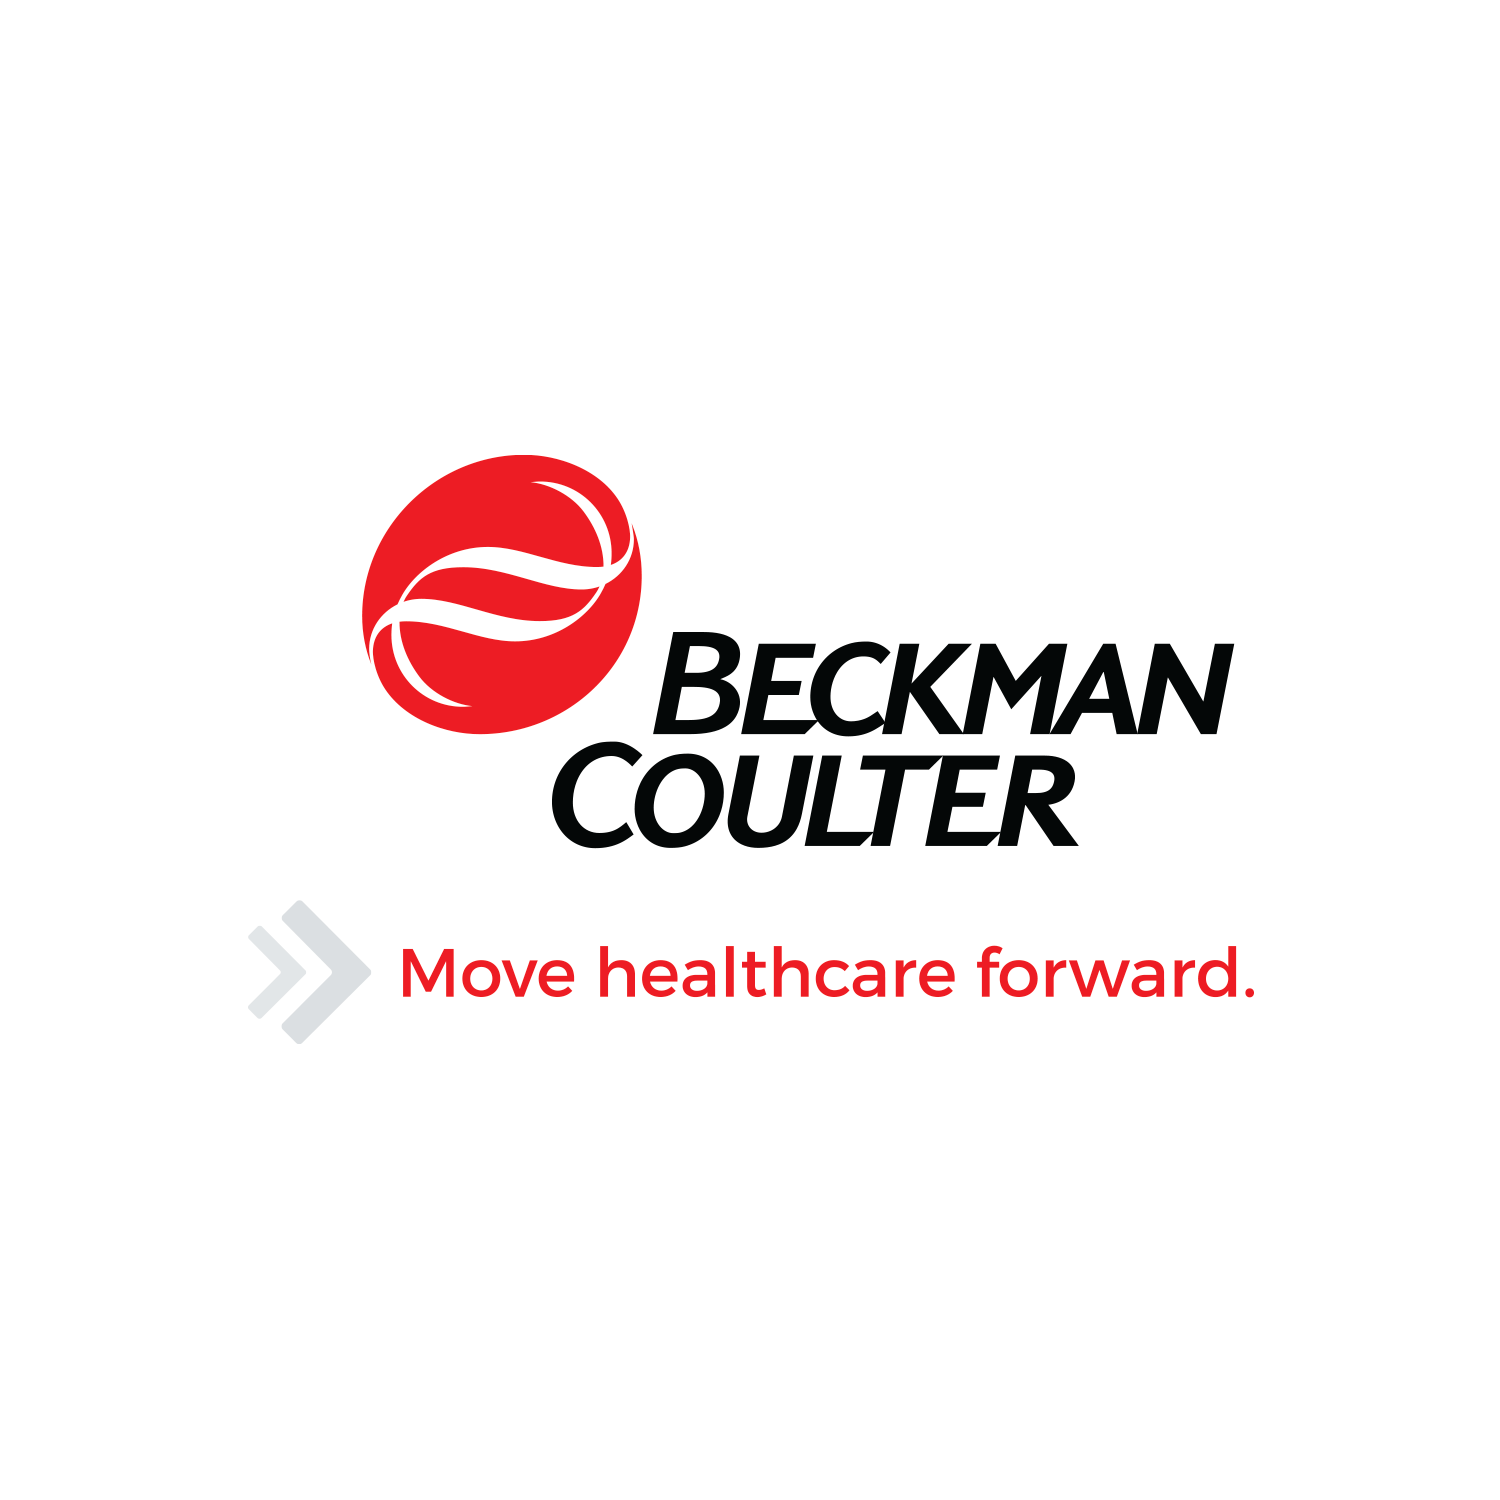 beckman-coulter